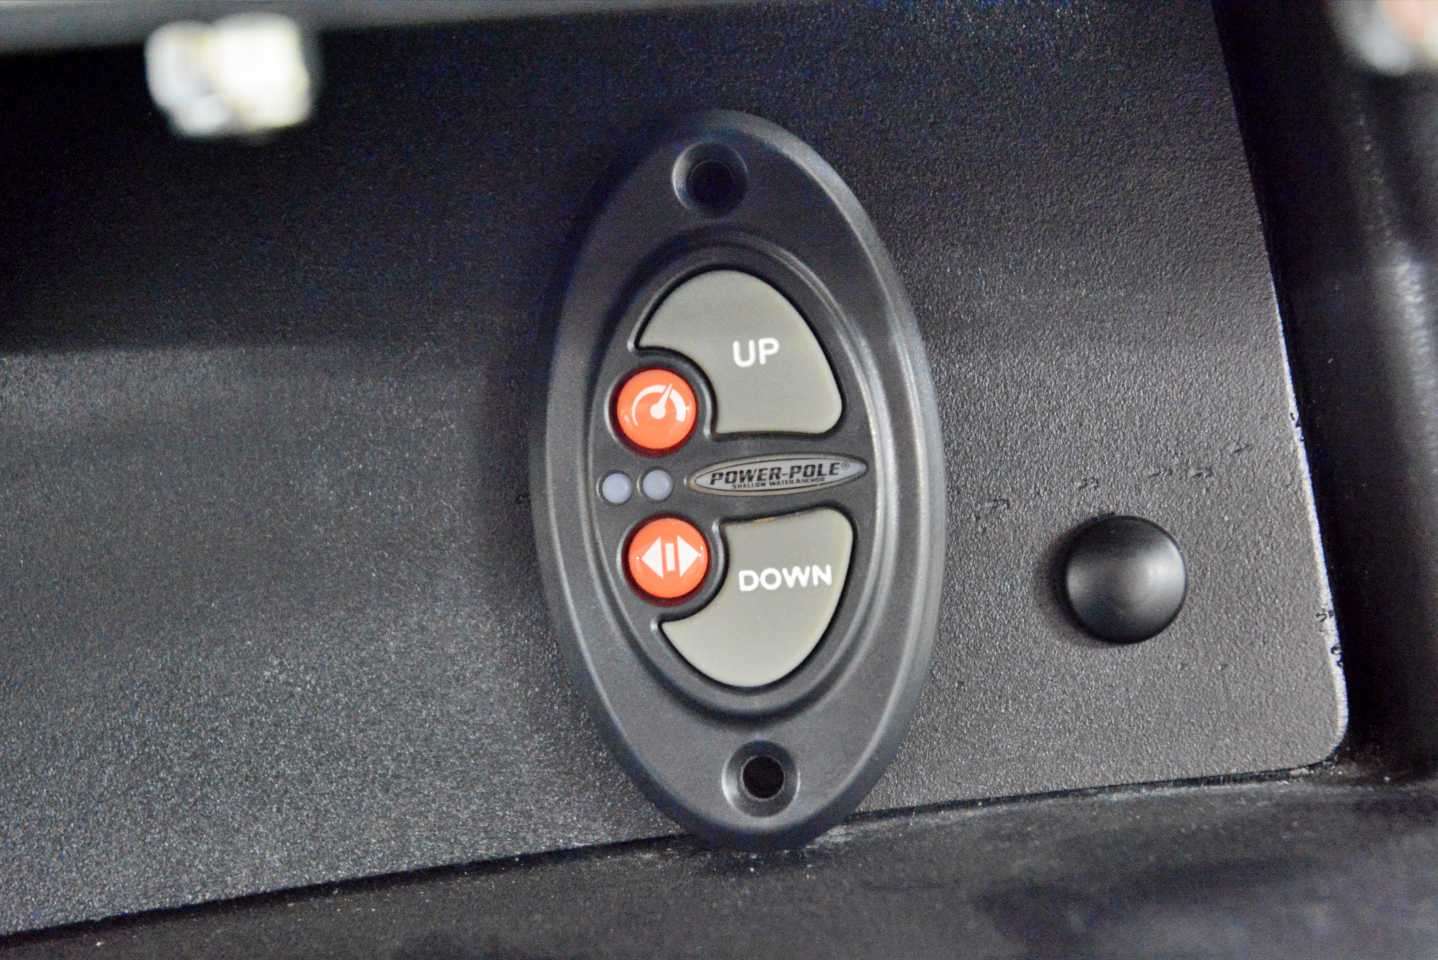 On the right-hand side of the dashboard are the Power-Pole operating switches.  